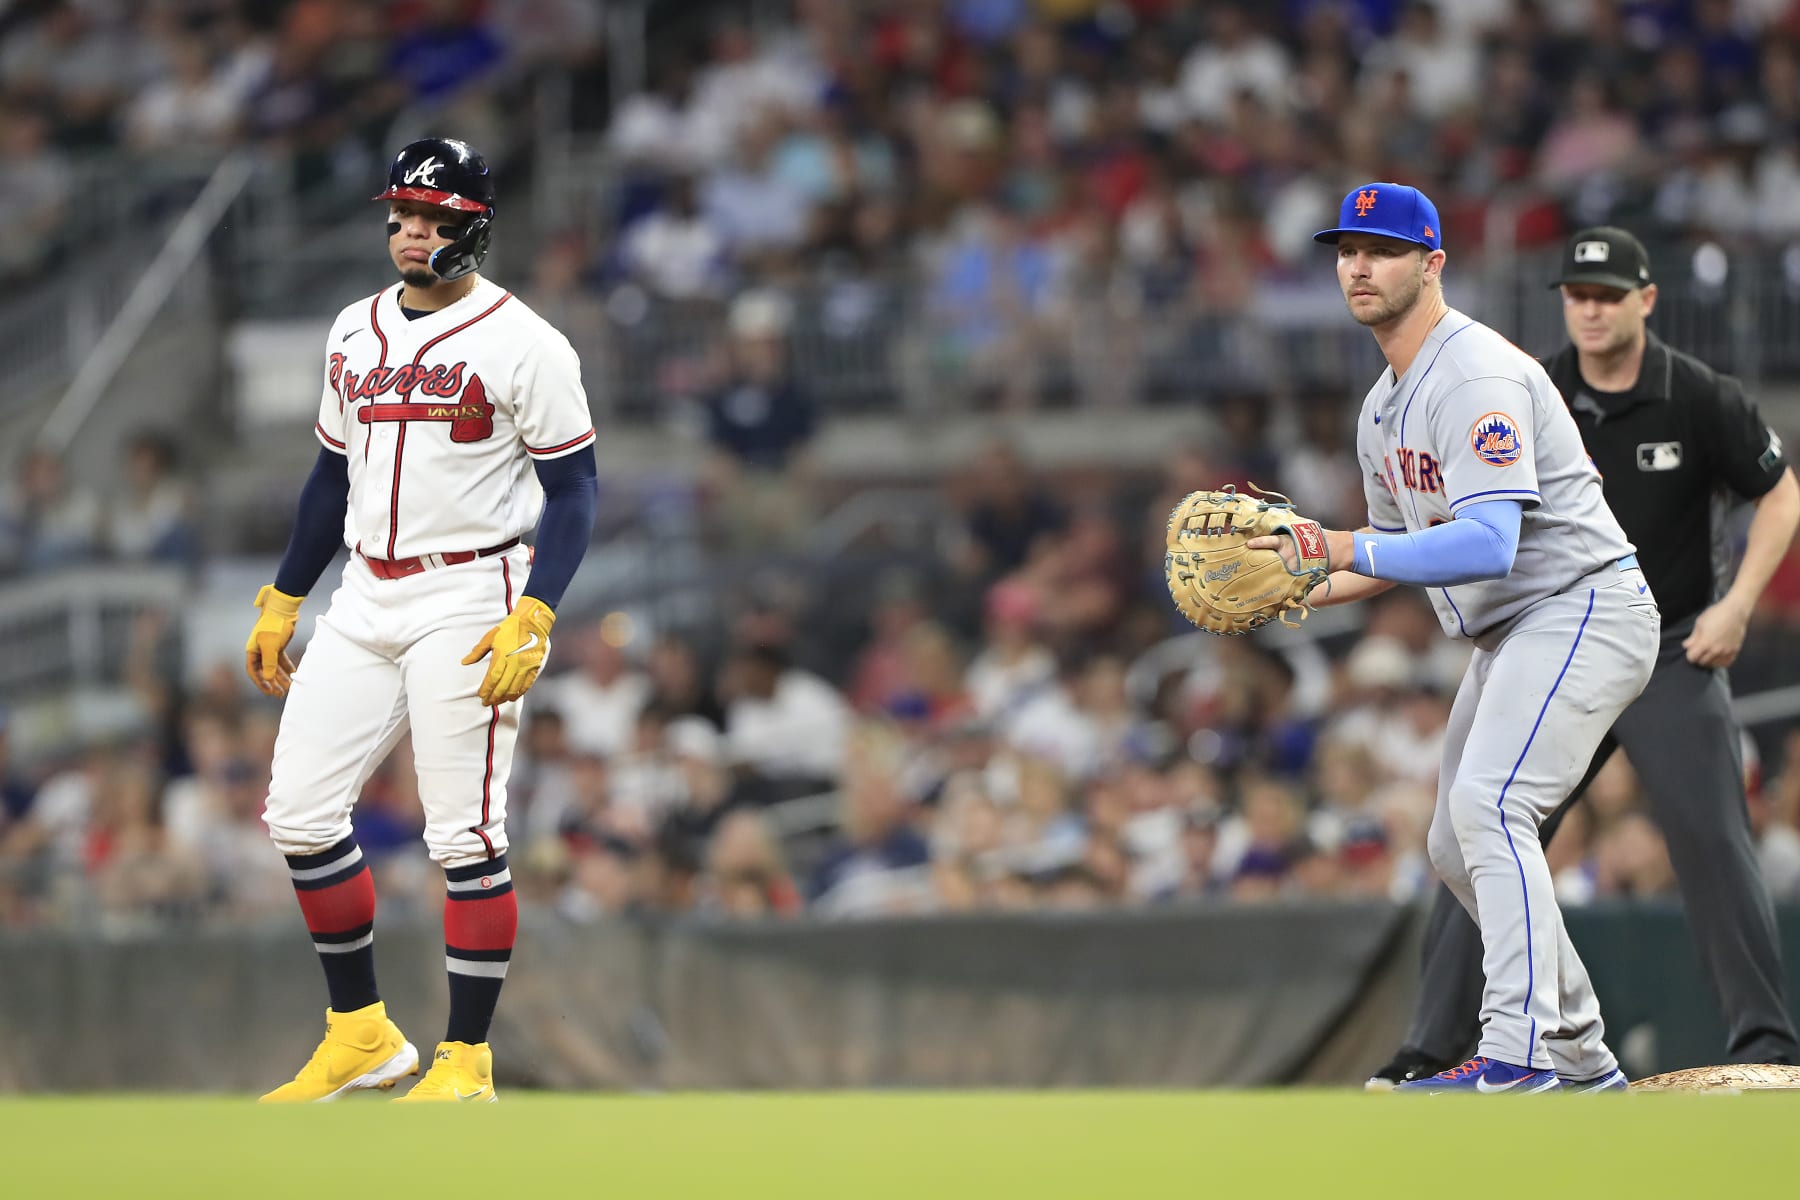 MLB on X: NL East, you've been chopped. The @Braves have